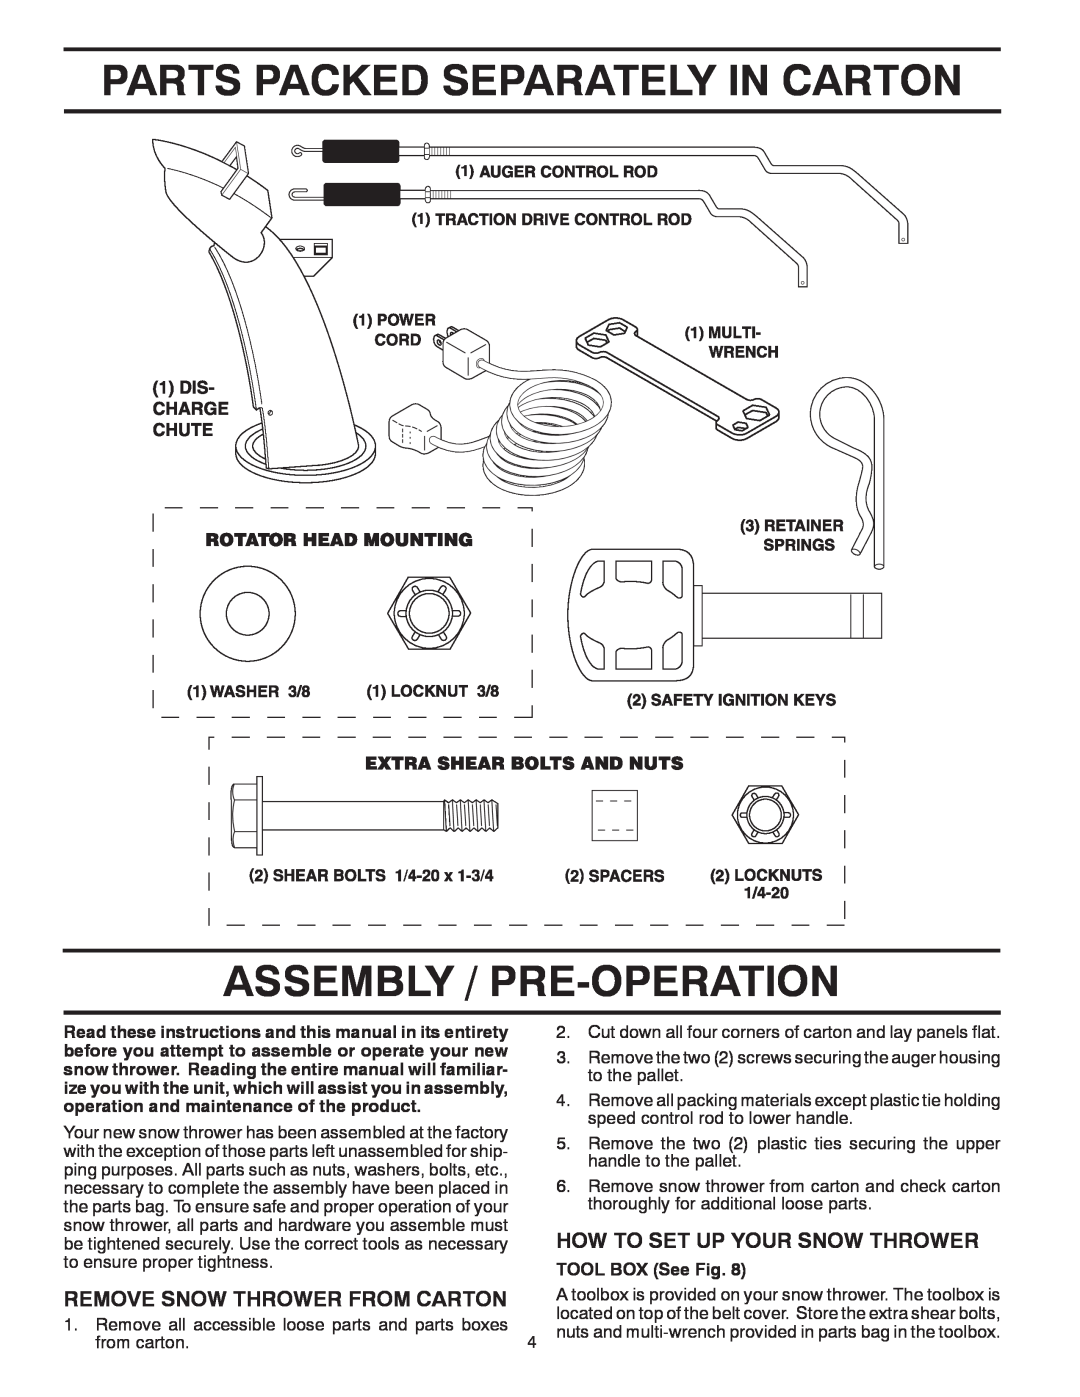 Poulan 415180 owner manual Parts Packed Separately In Carton Assembly / Pre-Operation, How To Set Up Your Snow Thrower 